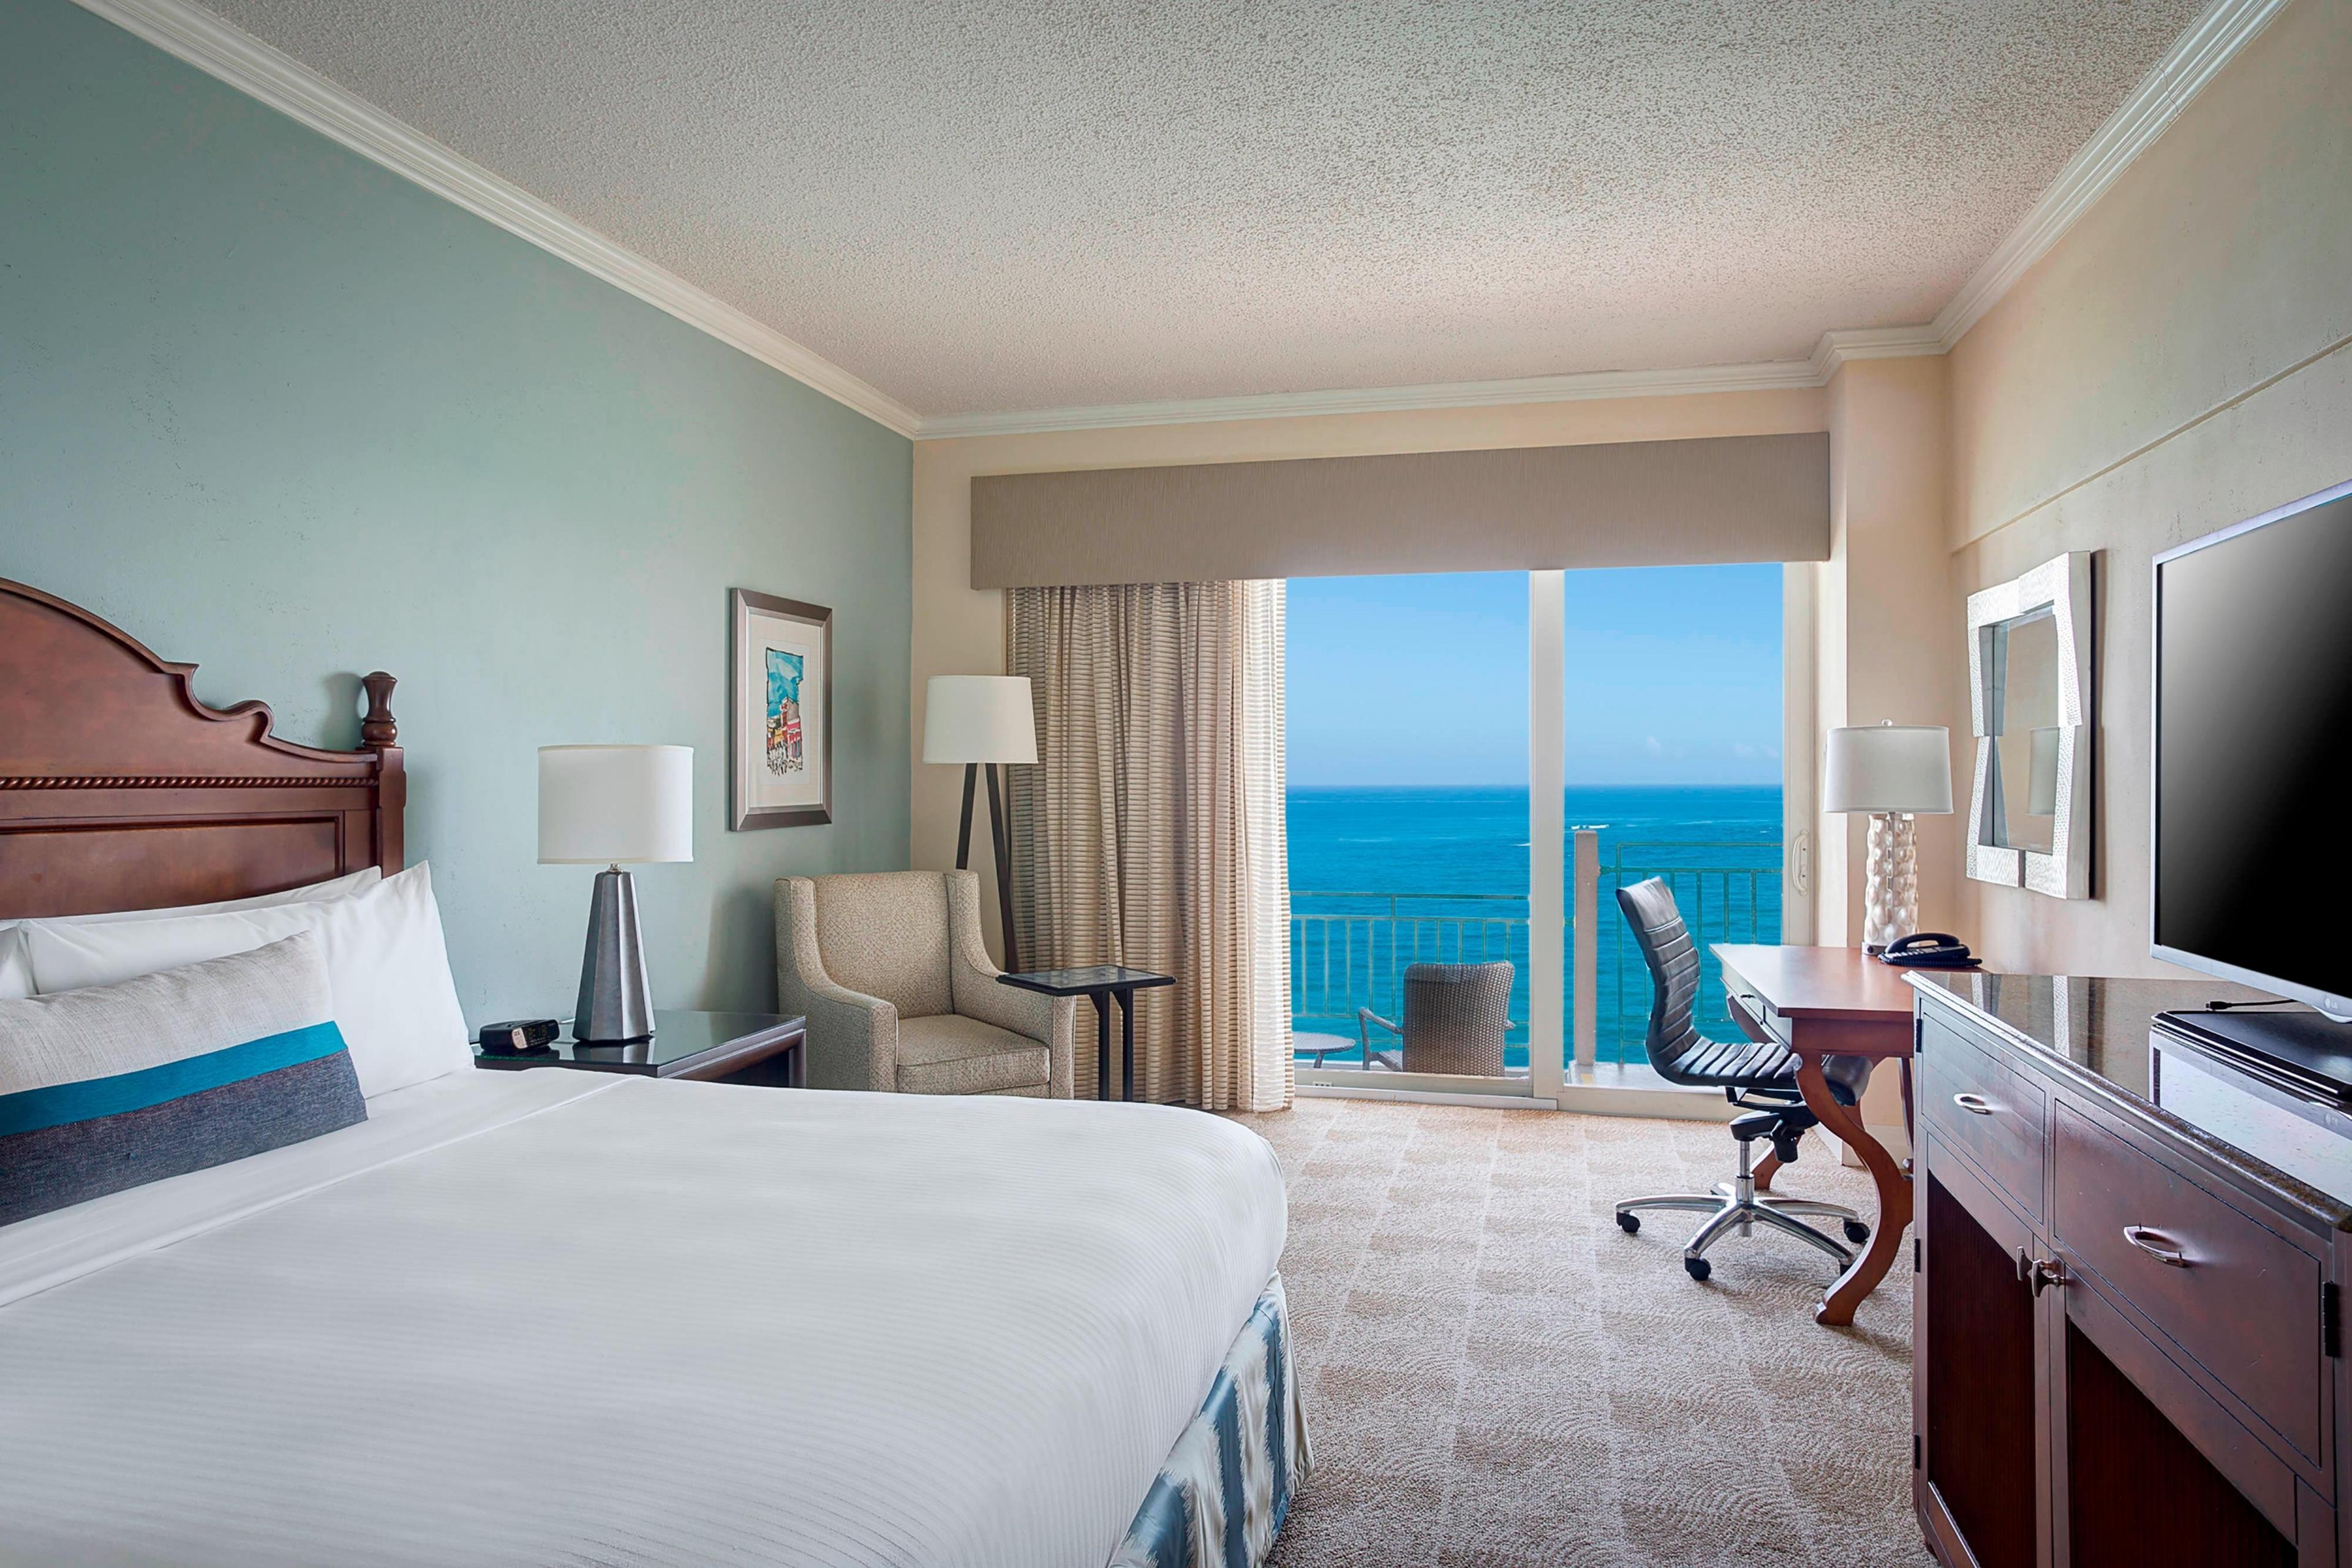 Spacious king-size beds offer the ultimate retreat for a sound night’s sleep with 300-thread-count linens and luxurious down comforters - the perfect hotel room for comfort on your San Juan getaway.